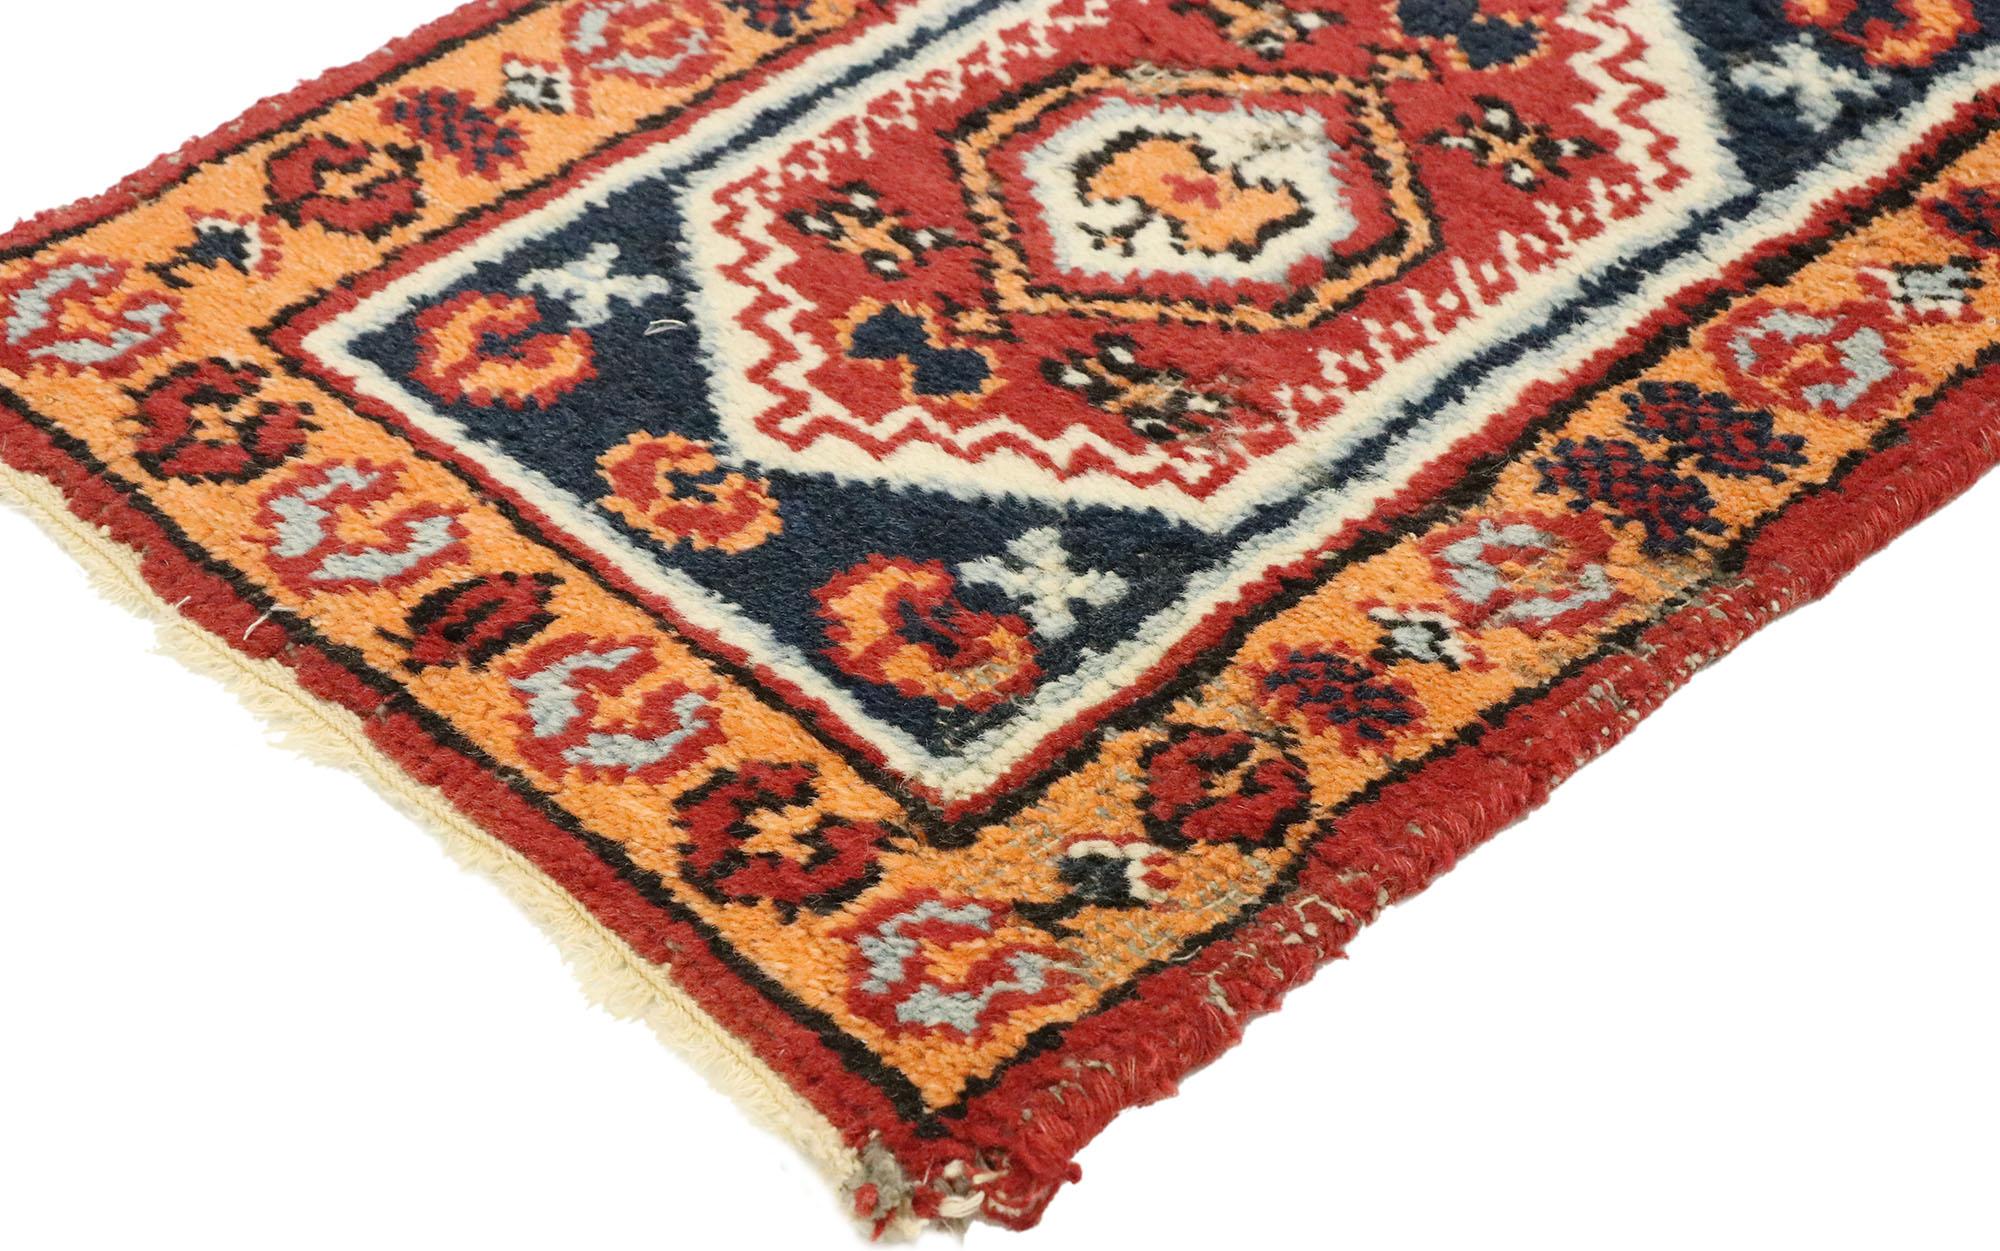 74913 Small Vintage Indian Oushak Rug, 01'04 x 01'10. Small vintage Indian Oushak rugs are handwoven textiles from India that draw inspiration from traditional Oushak rugs of Turkey. They feature Anatolian tribal motifs such as large, stylized